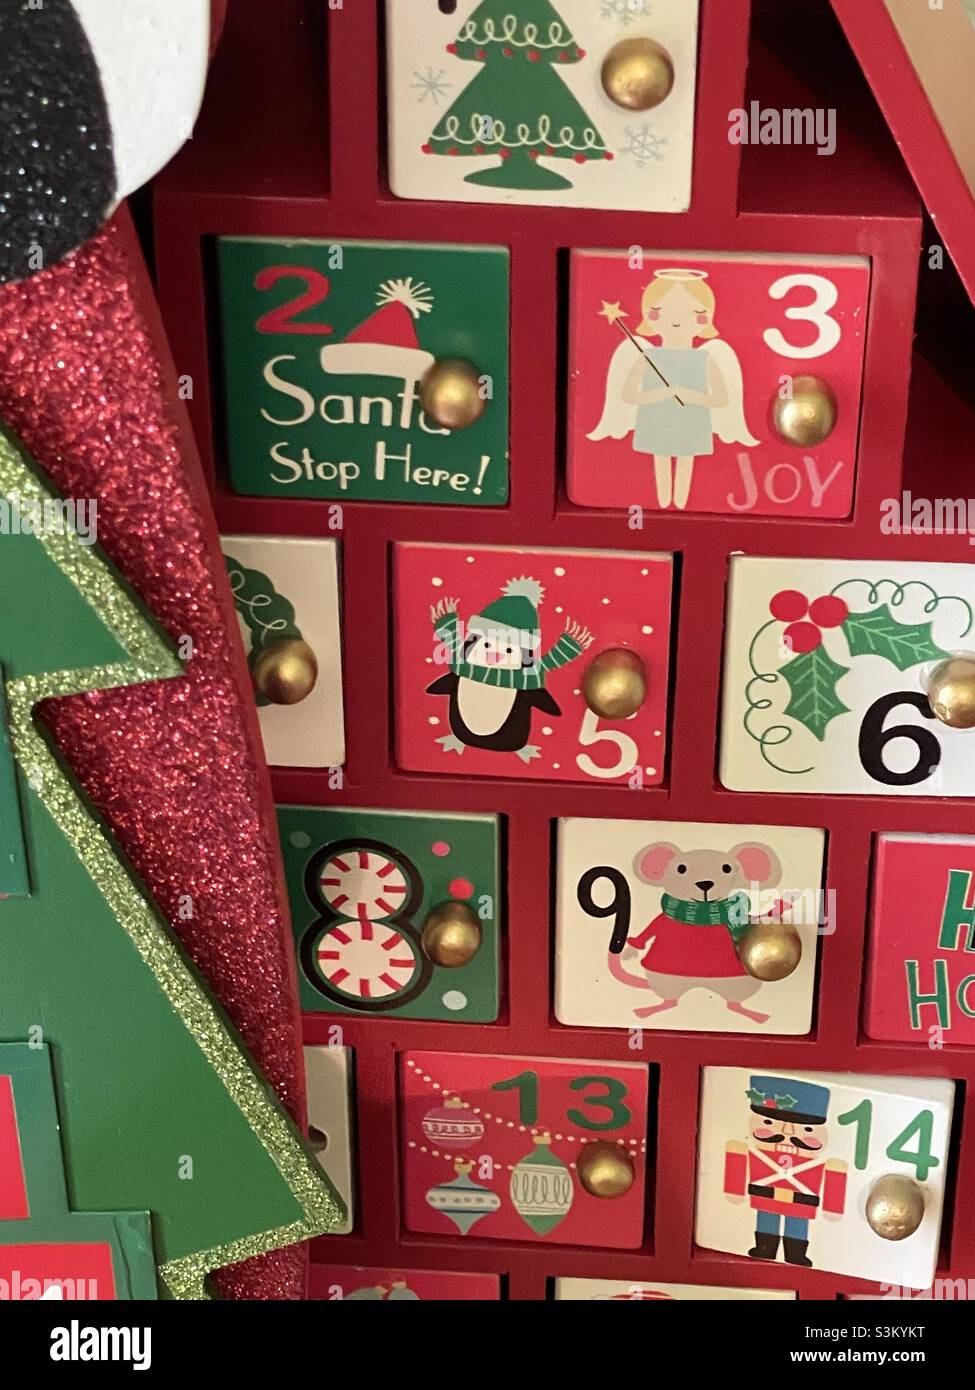 Christmas advent calendars as part of a home’s seasonal decorations in Utah, USA. Stock Photo